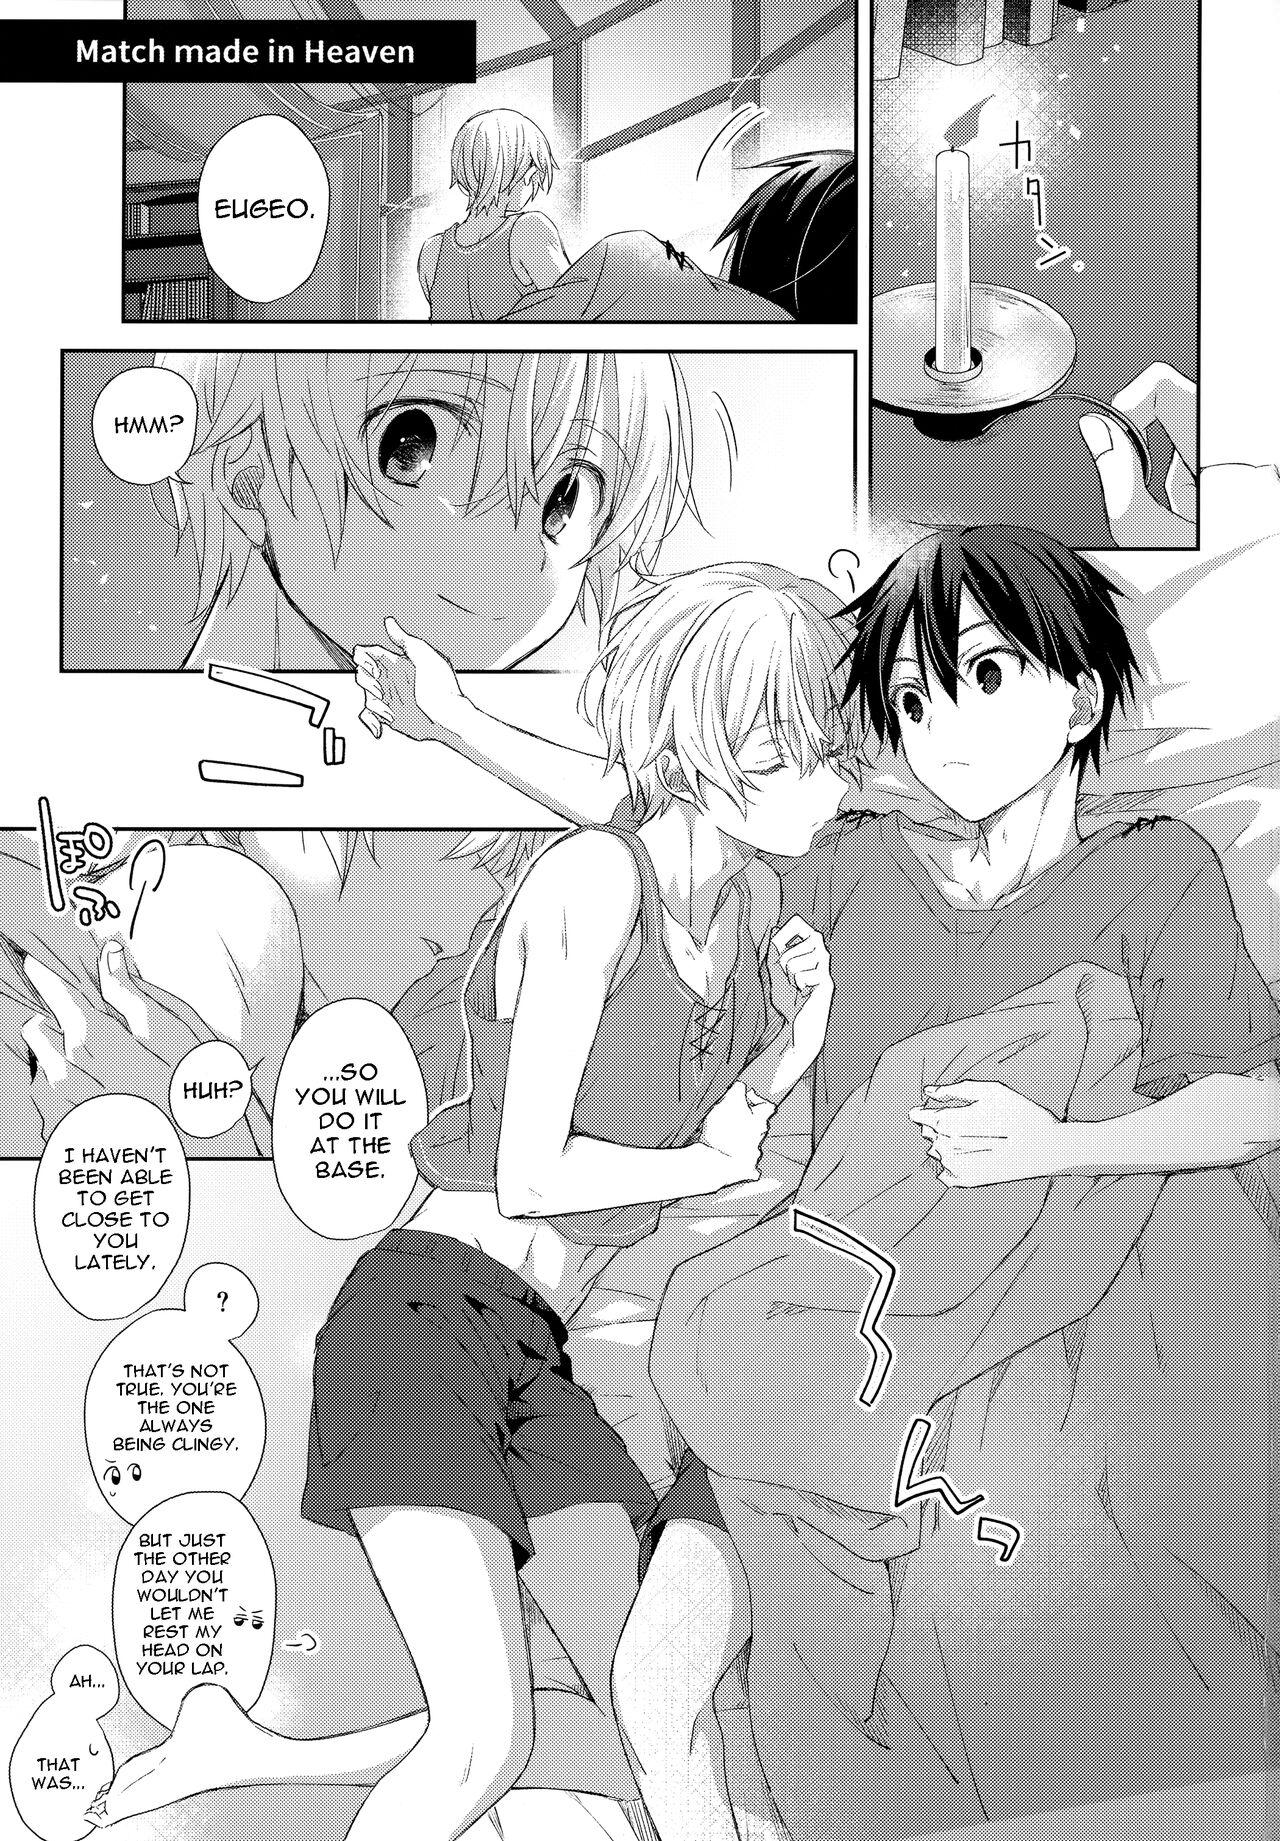 Interview Match made in heaven - Sword art online Group Sex - Page 2